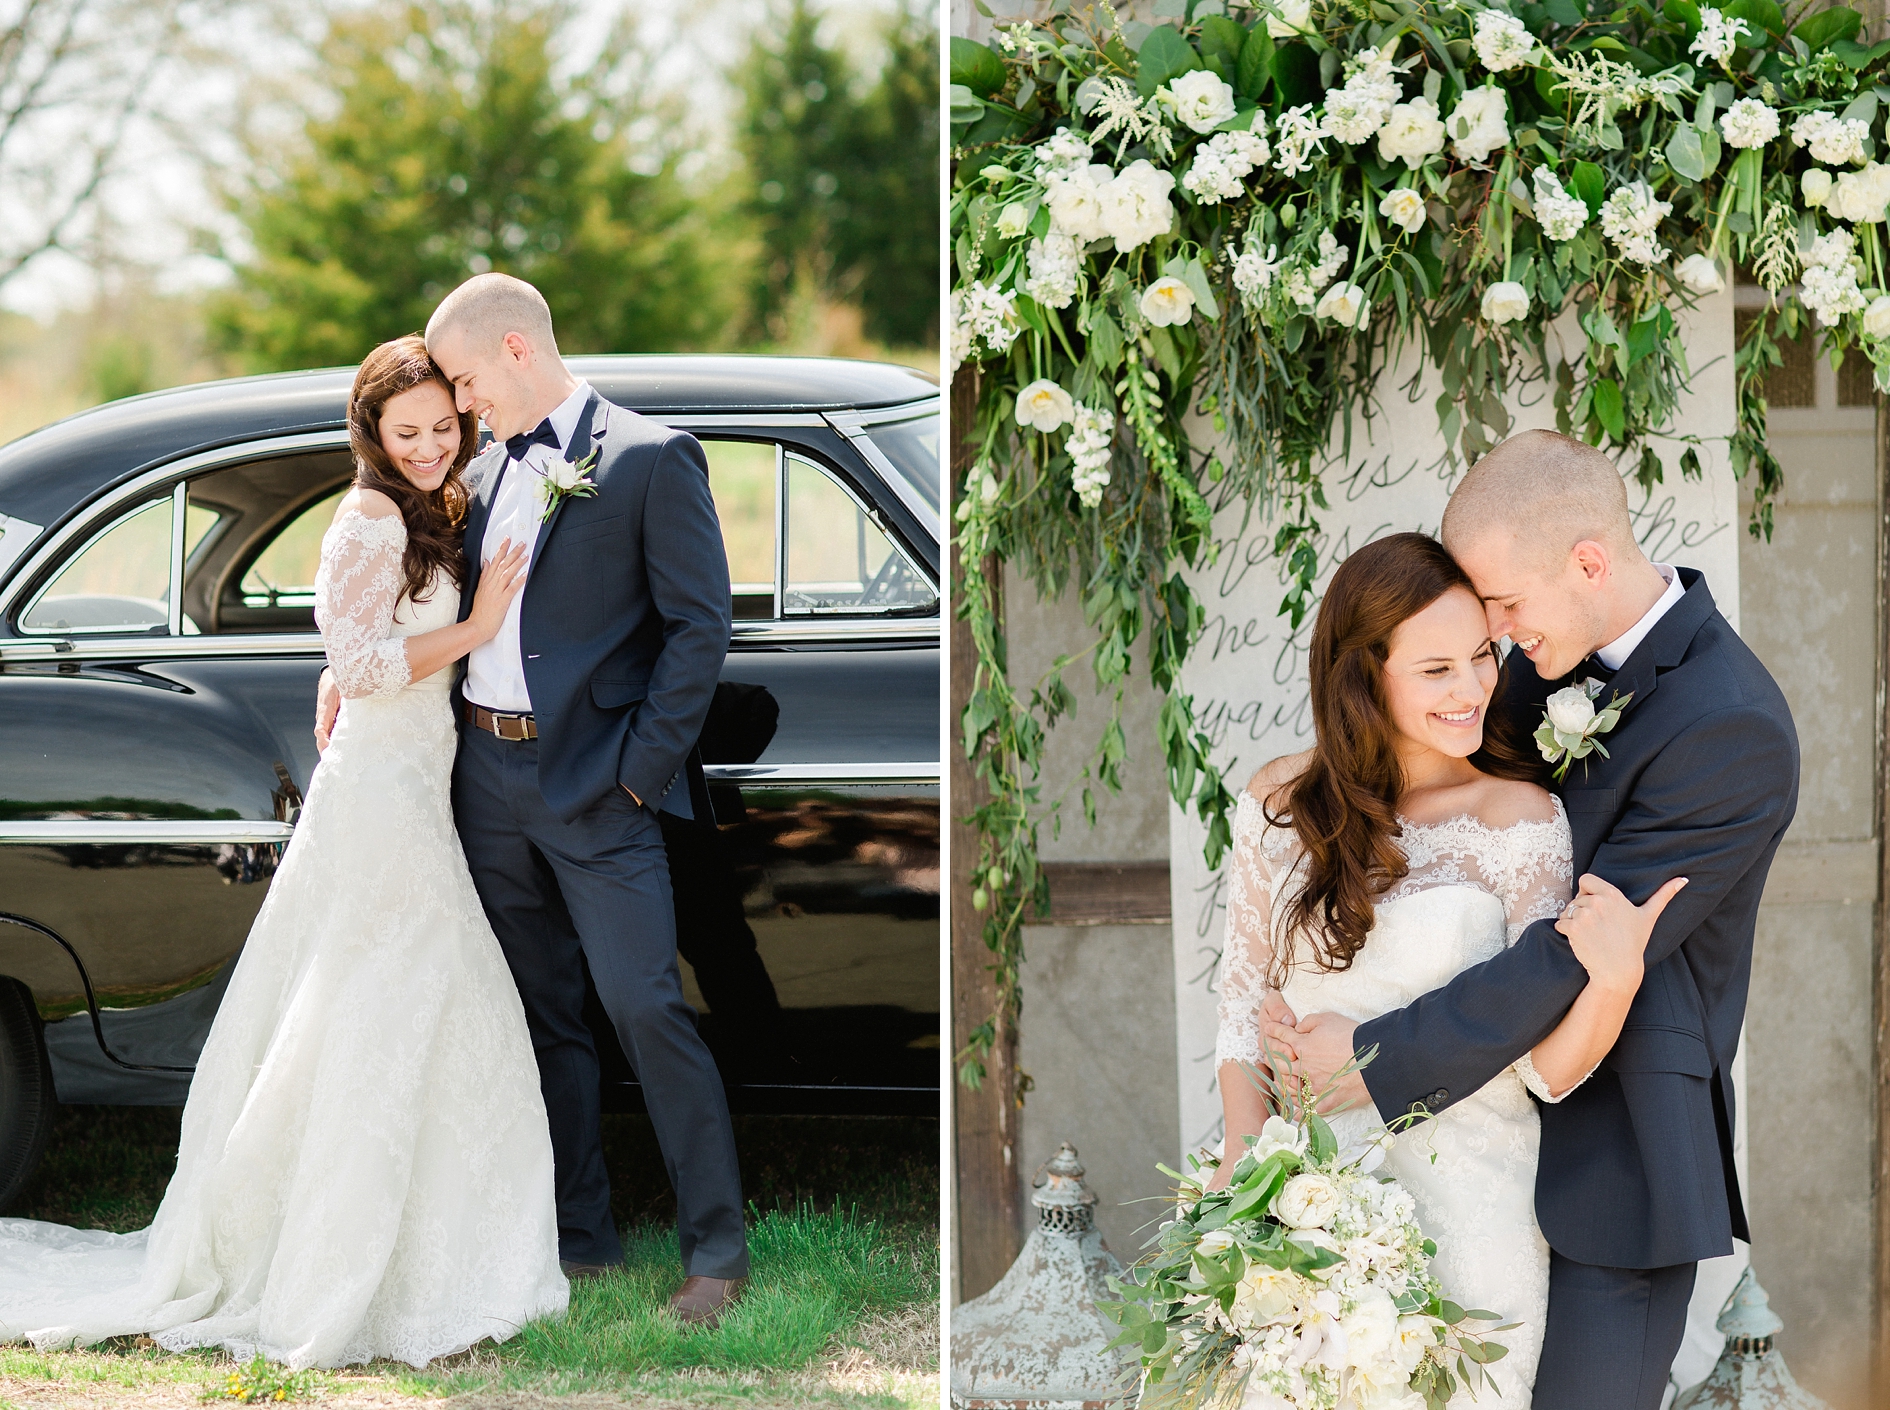 Tampa Wedding Photographer | © Ailyn La Torre Photography 2015